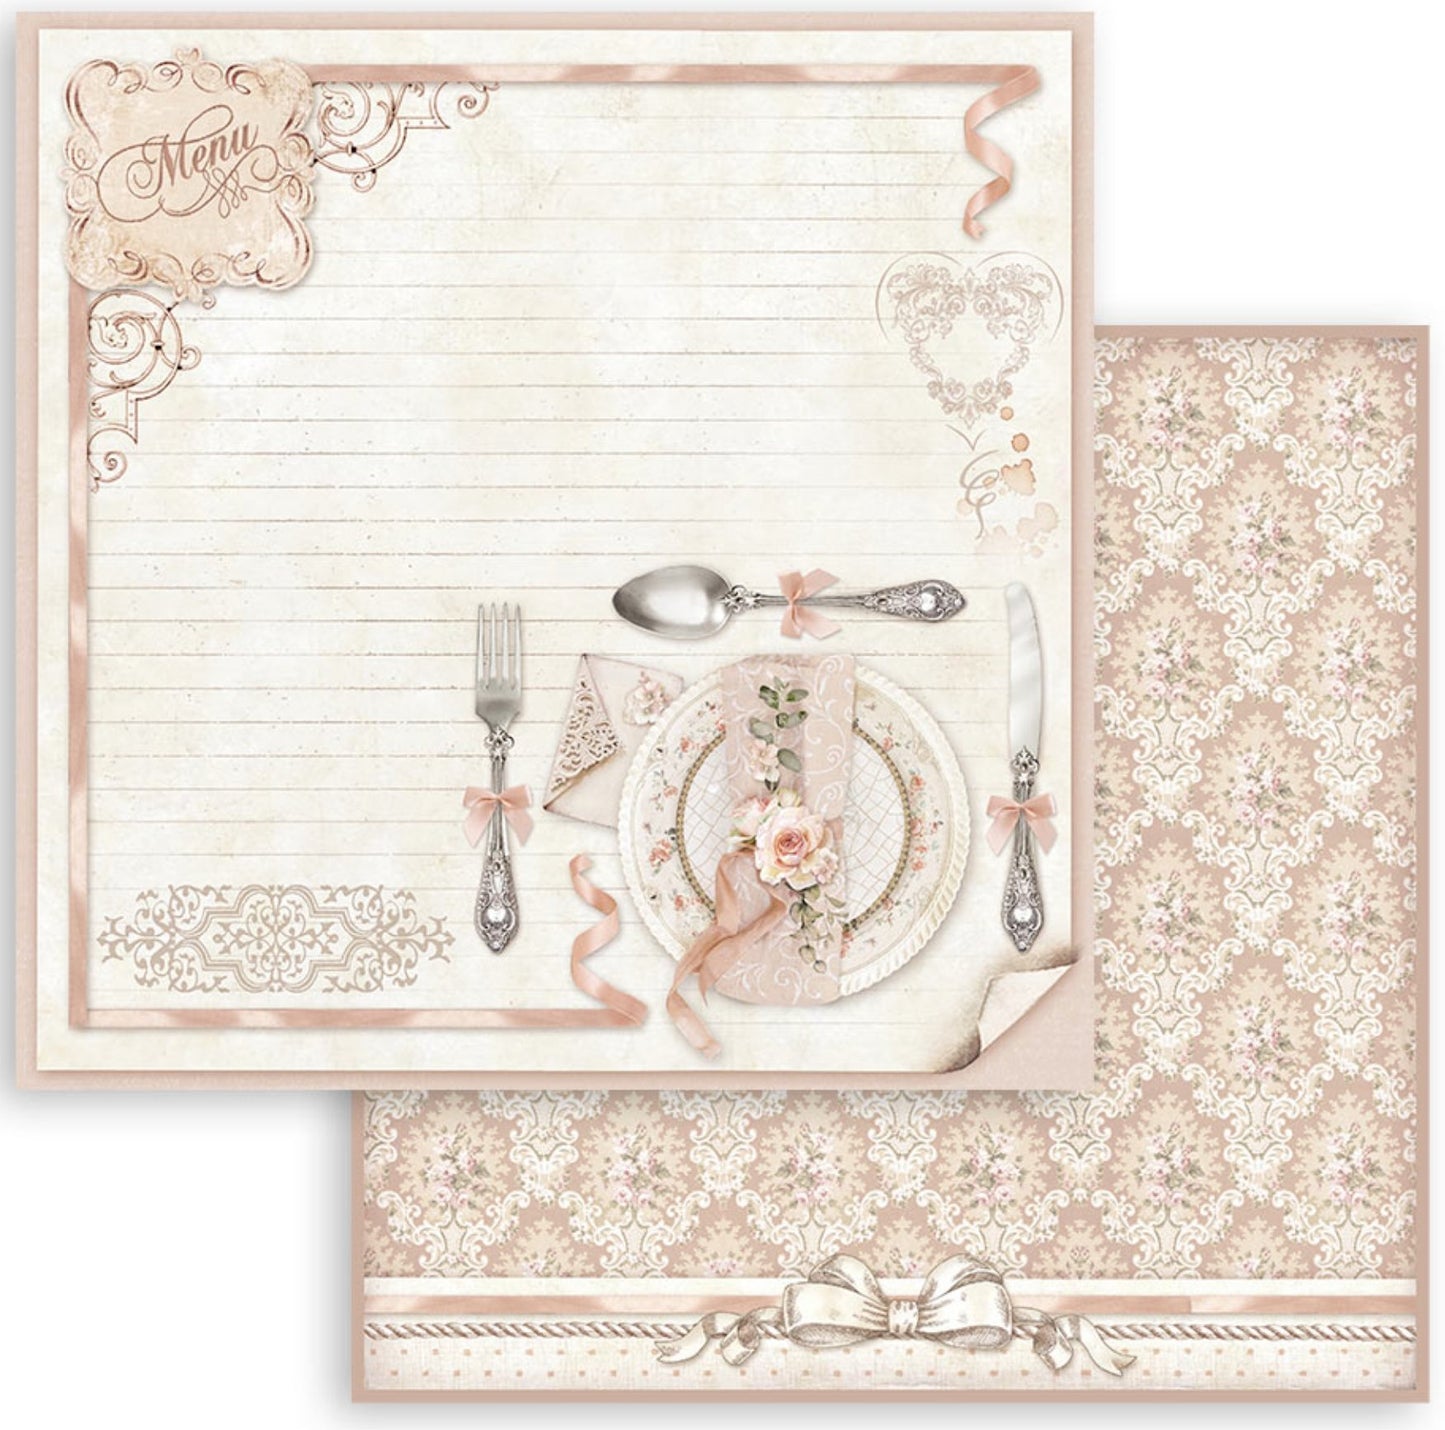 Stamperia - Scrapbooking Pad 10 sheets cm 30,5x30,5 (12"x12") - You and Me Stamperia